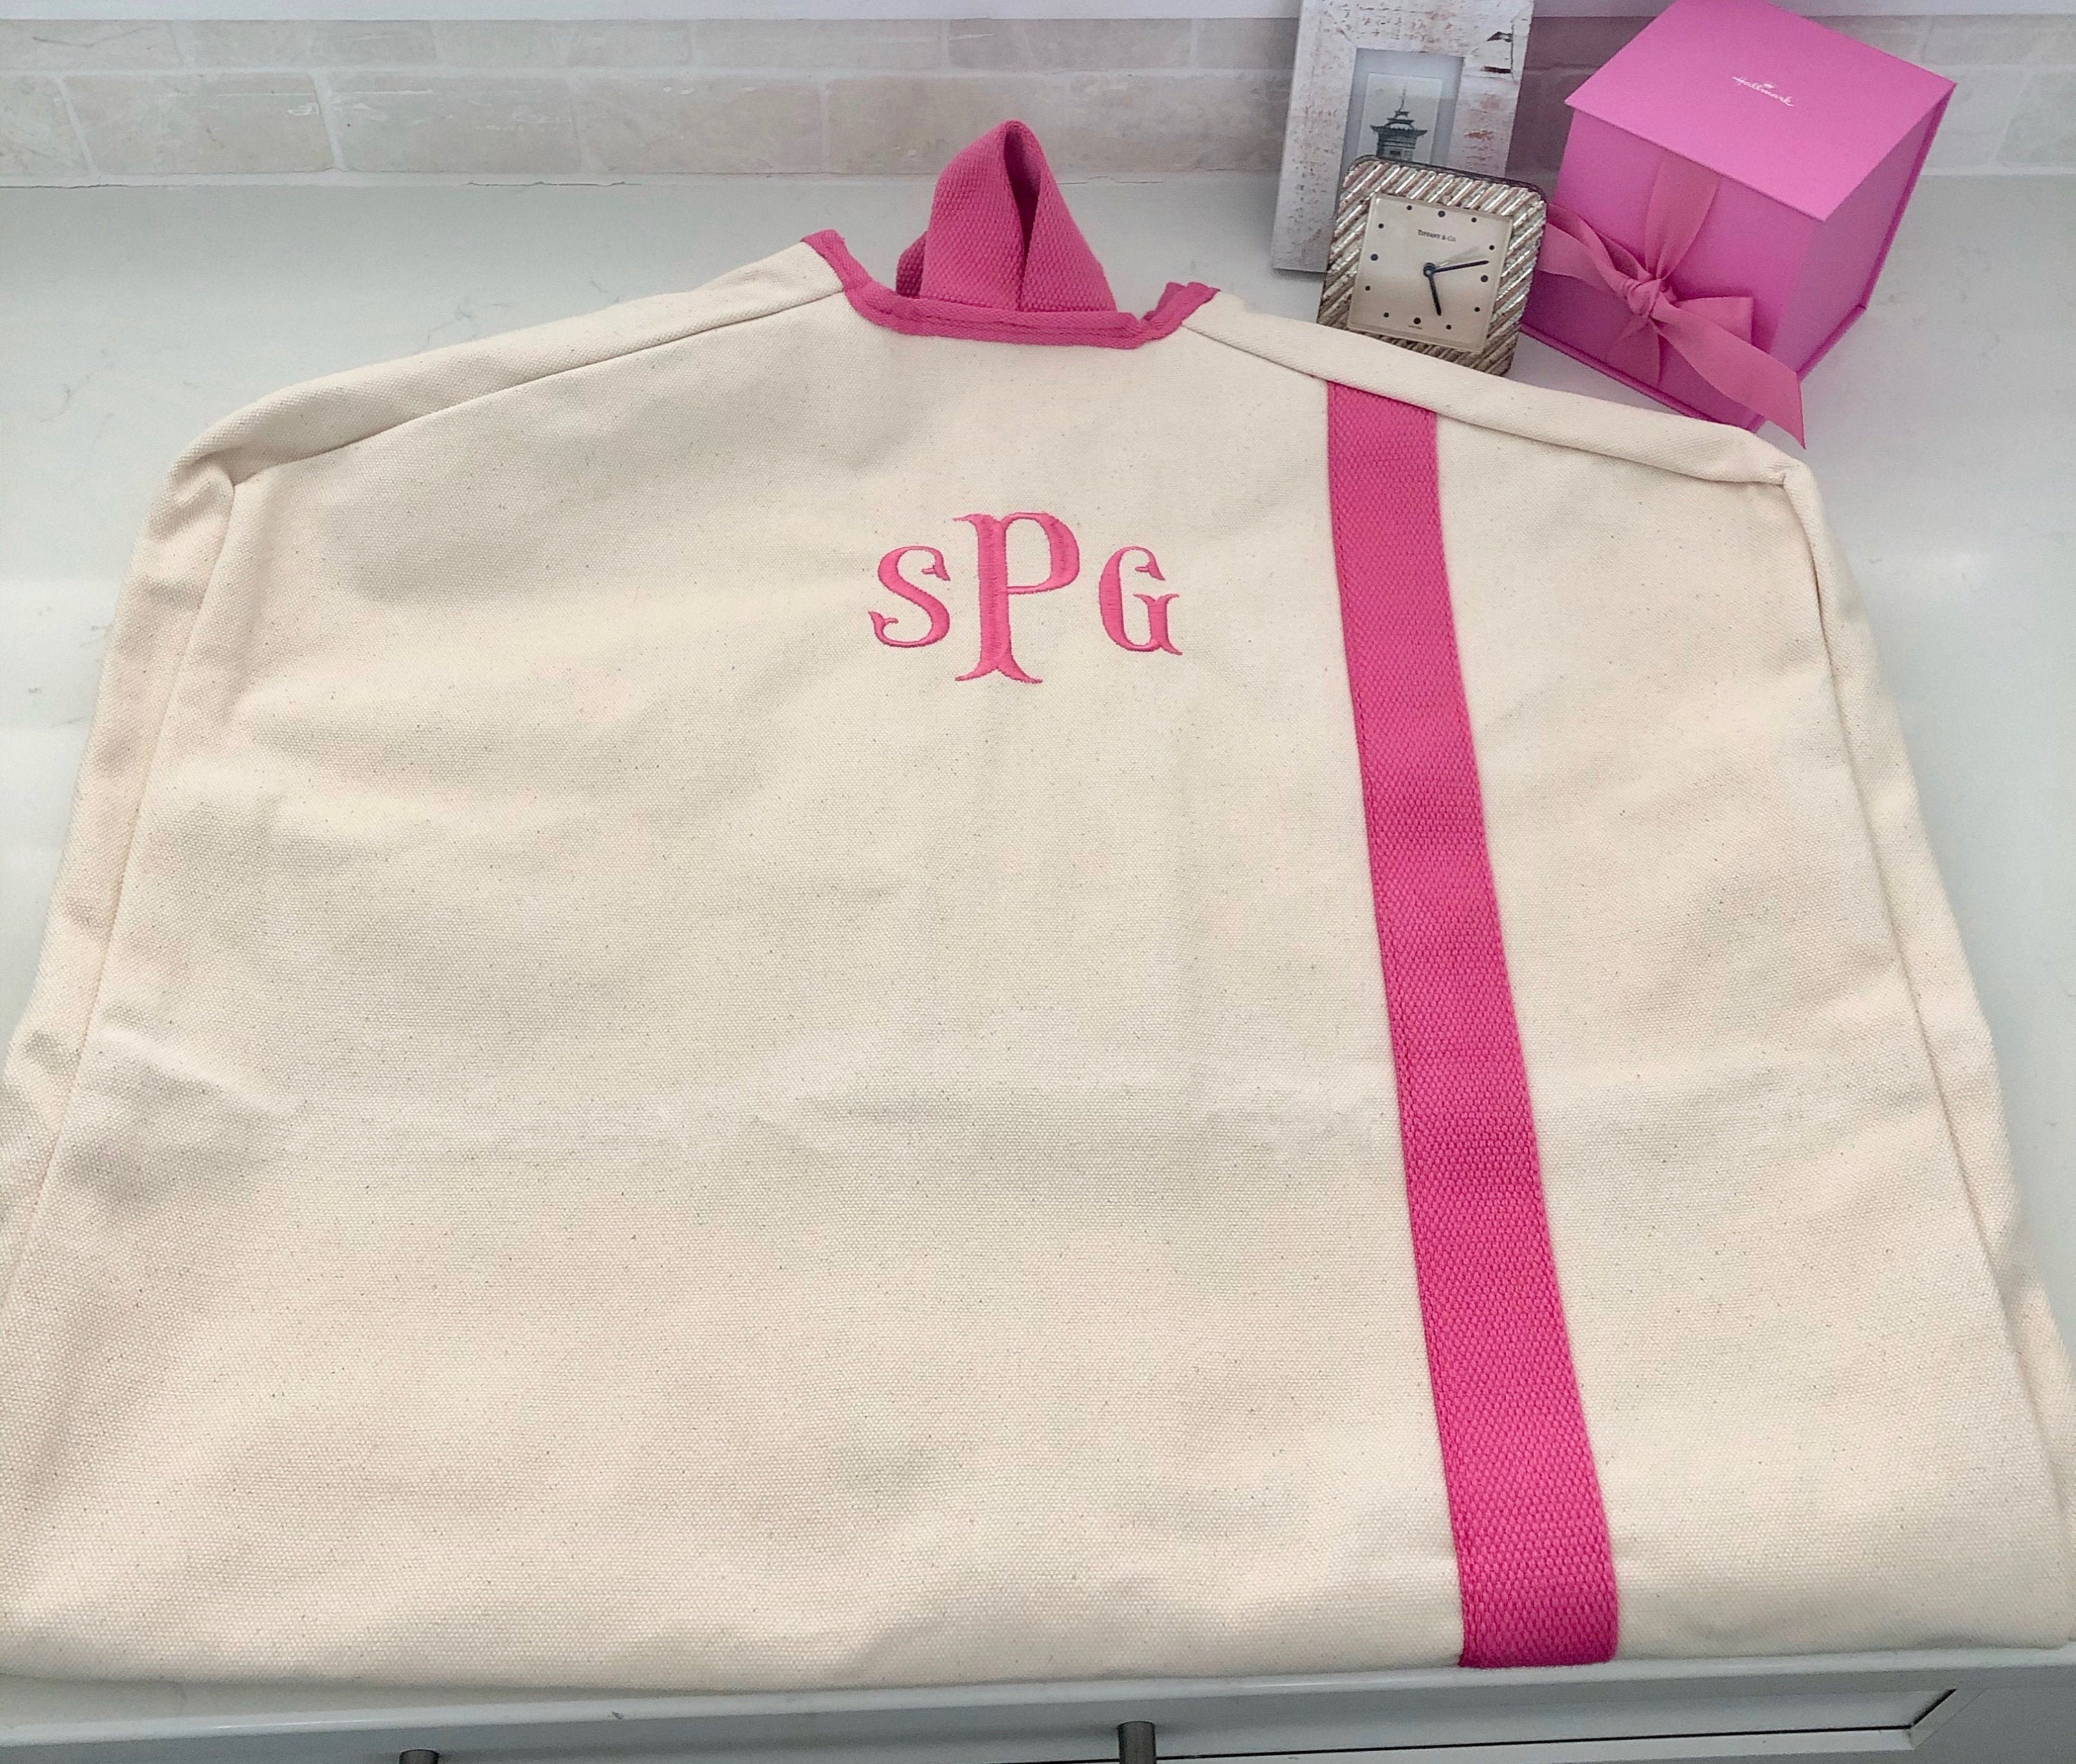 Monogram Travel Personalized Garment Bag Gifts for Him 